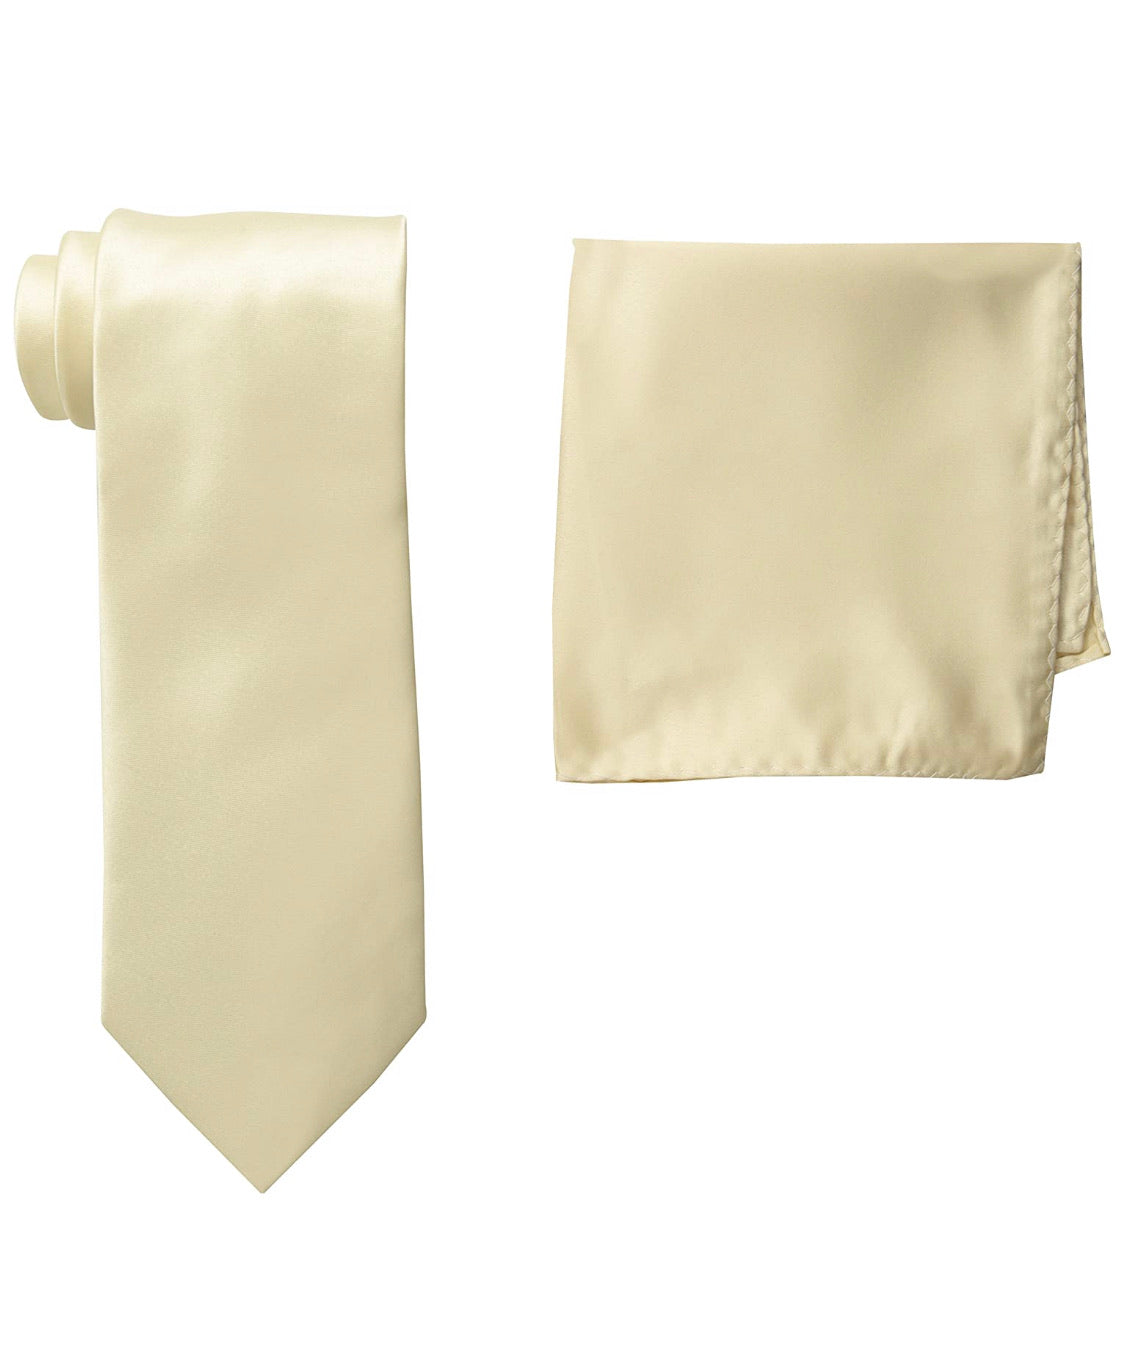 Stacy Adams Solid Ivory Tie and Hanky - On Time Fashions Tuscaloosa